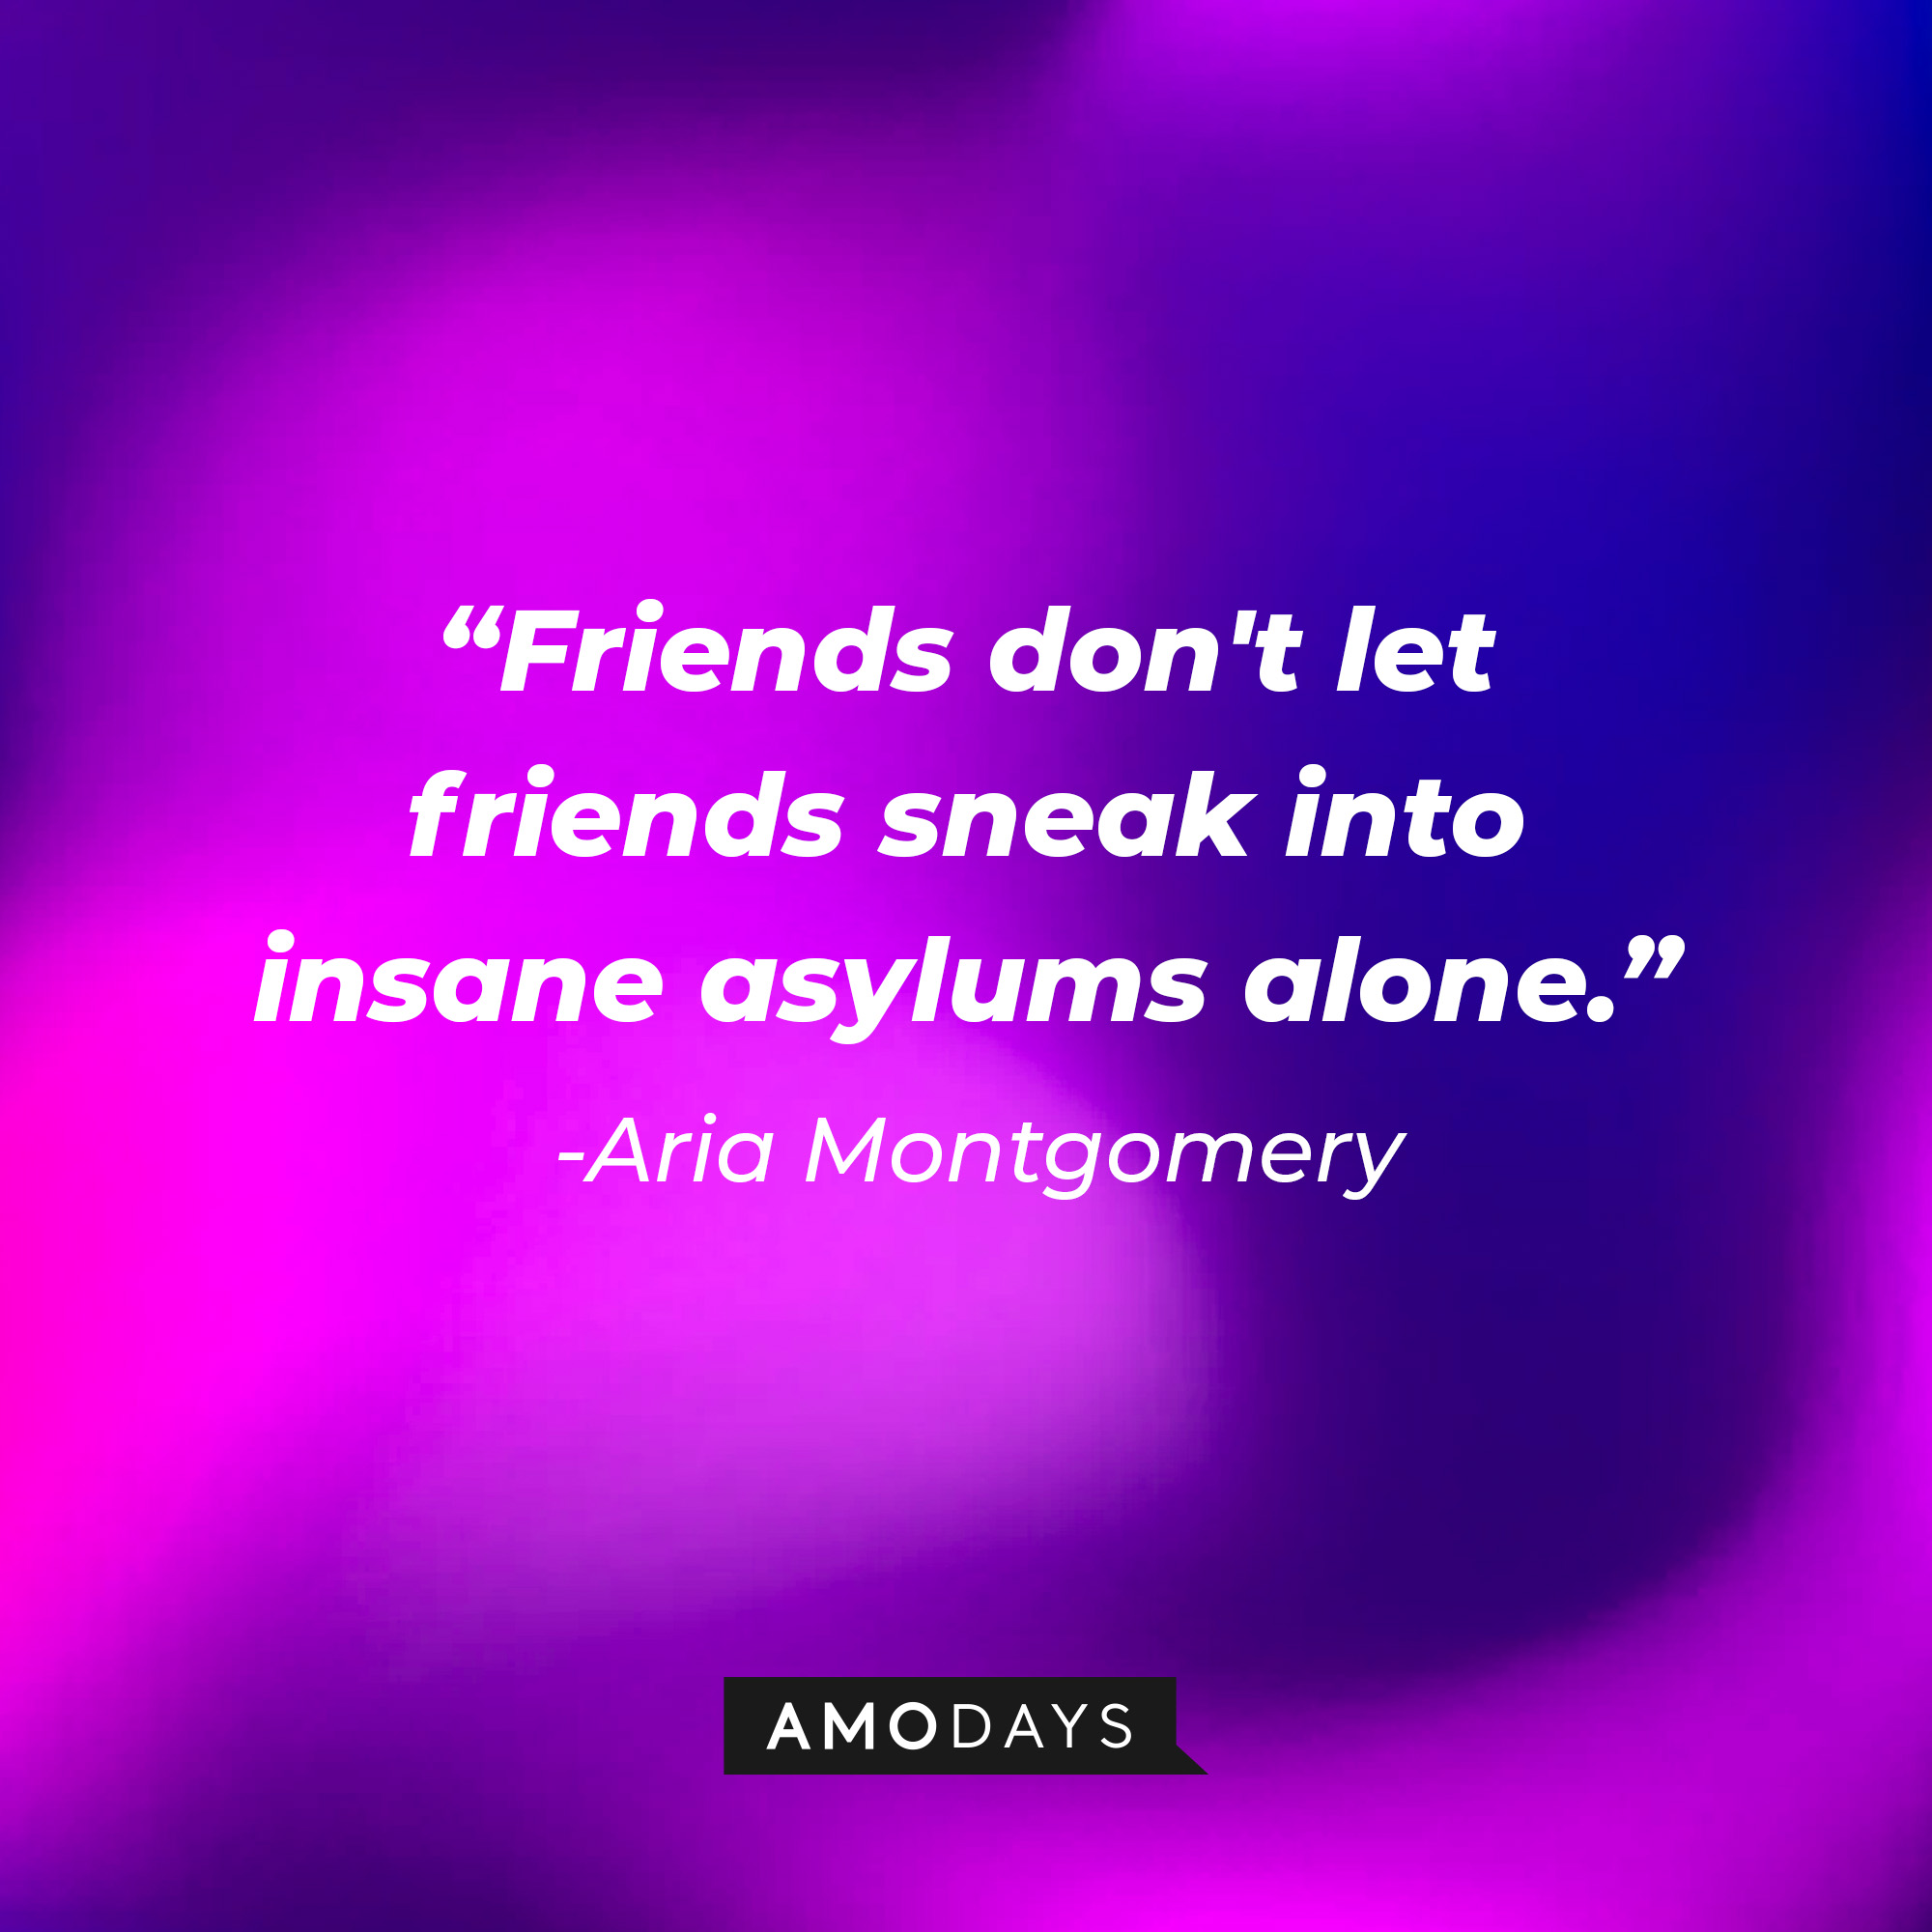 Aria Montgomery's quote: "Friends don't let friends sneak into insane asylums alone." | Source: Amodays